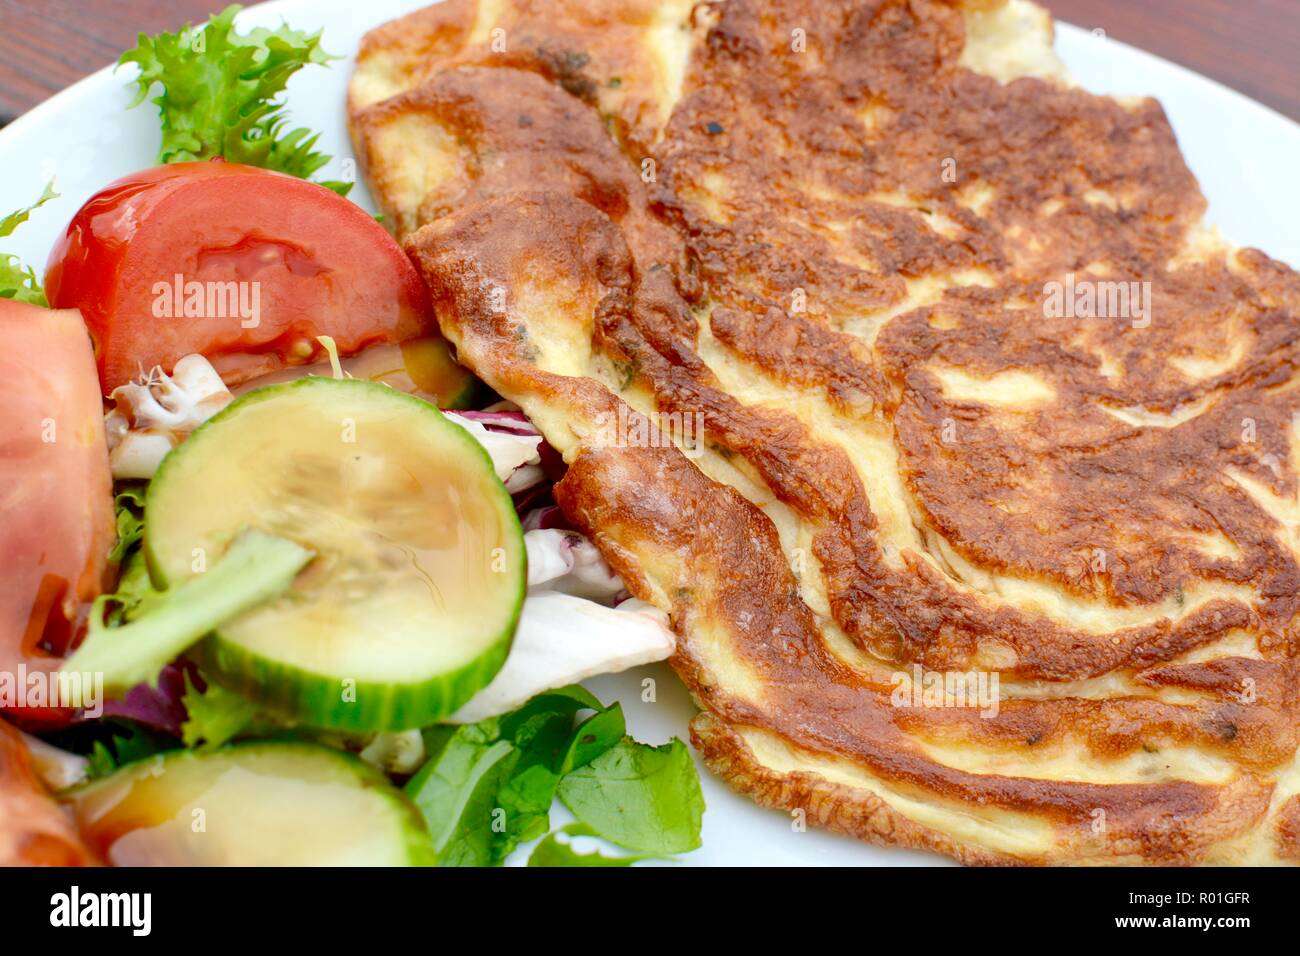 Golden cooked omelette with side salad served on a white plate Stock Photo